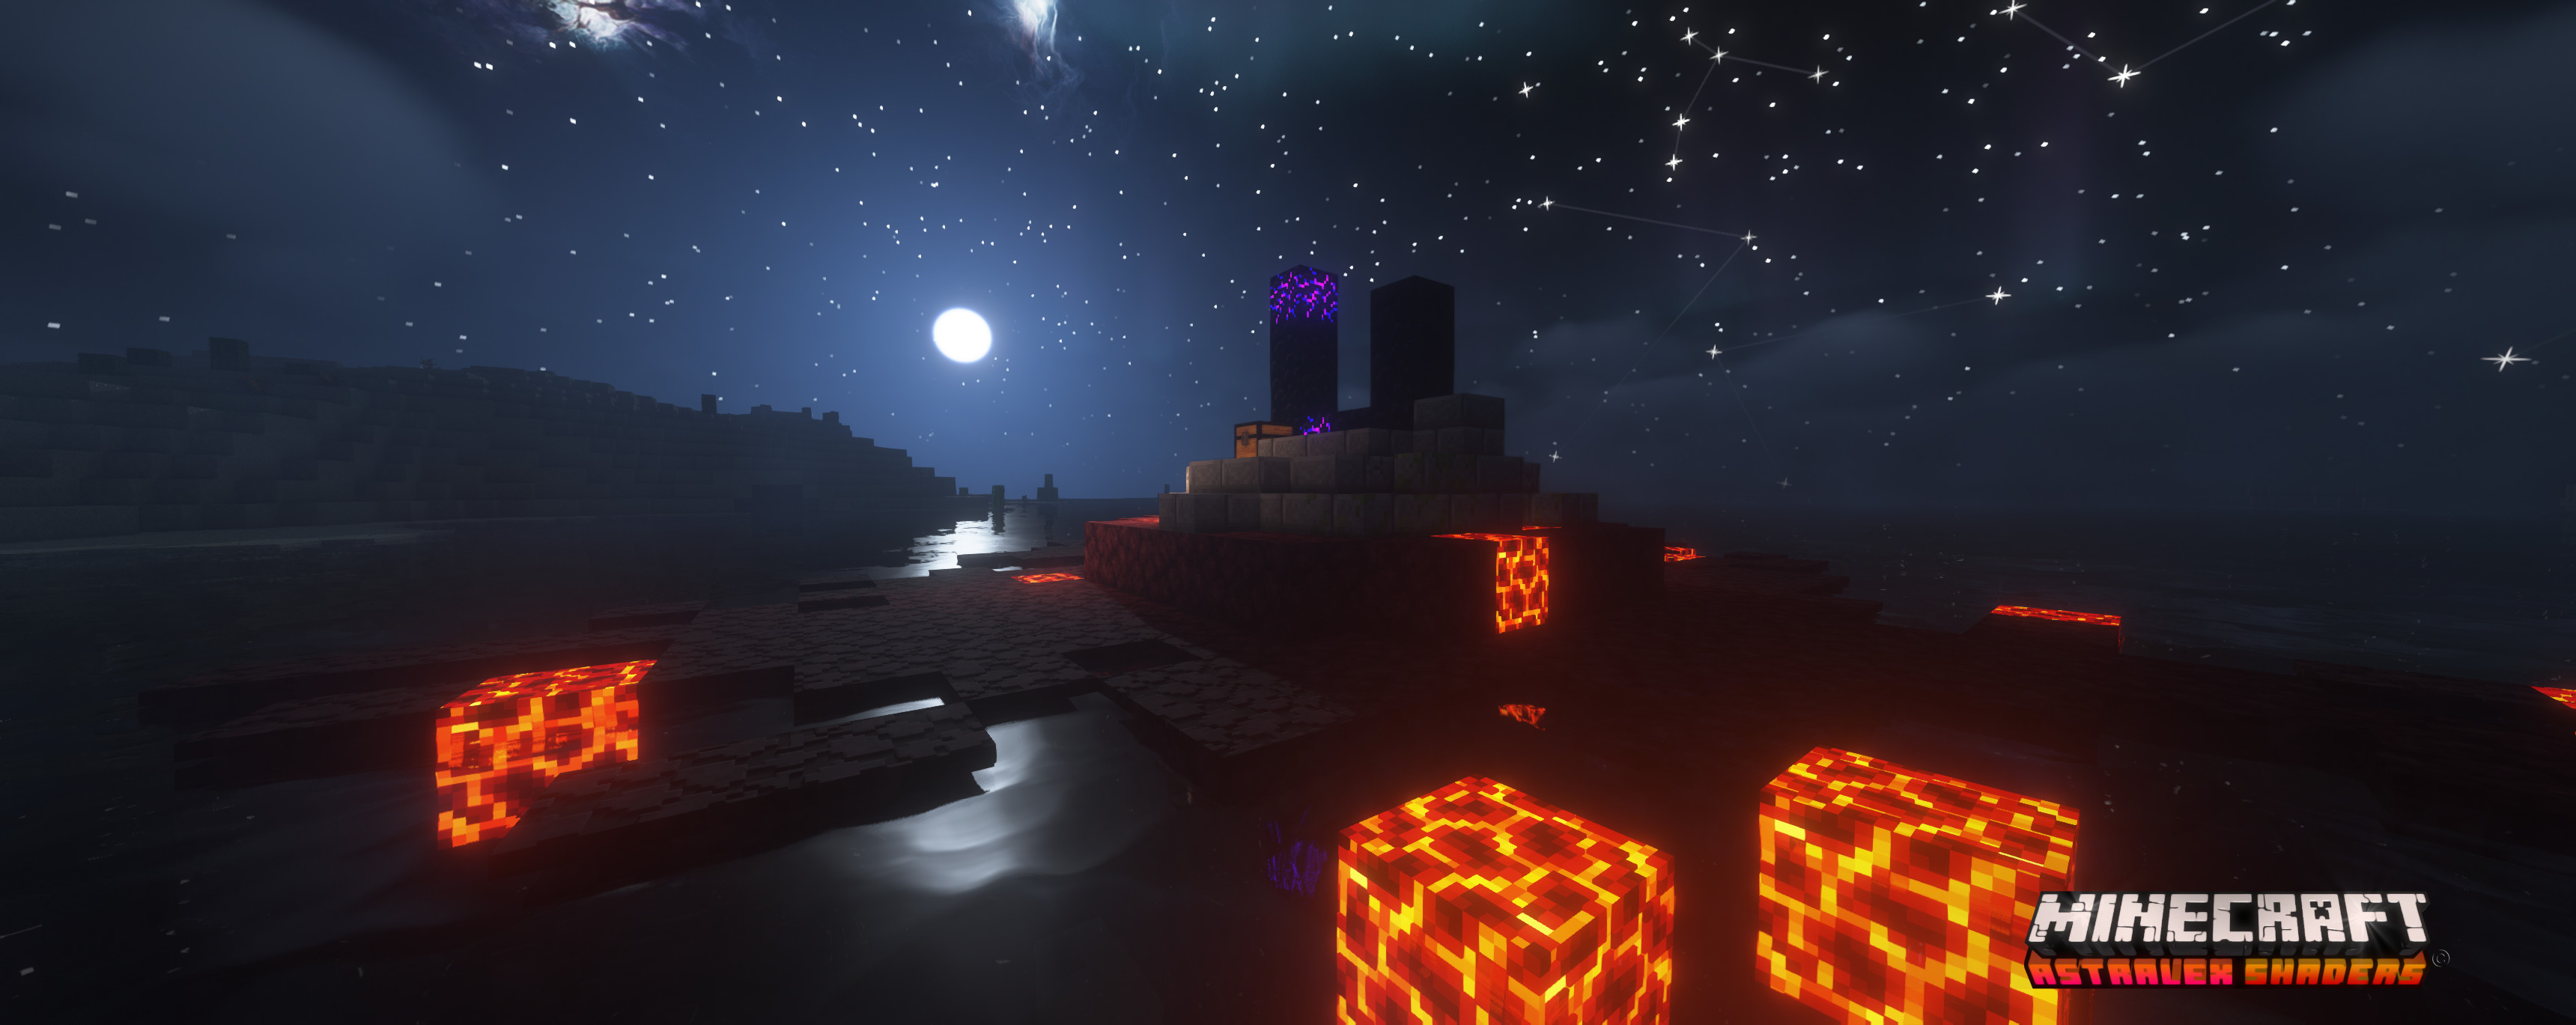 images/2406/14/AstraLex_Shaders_4.jpg